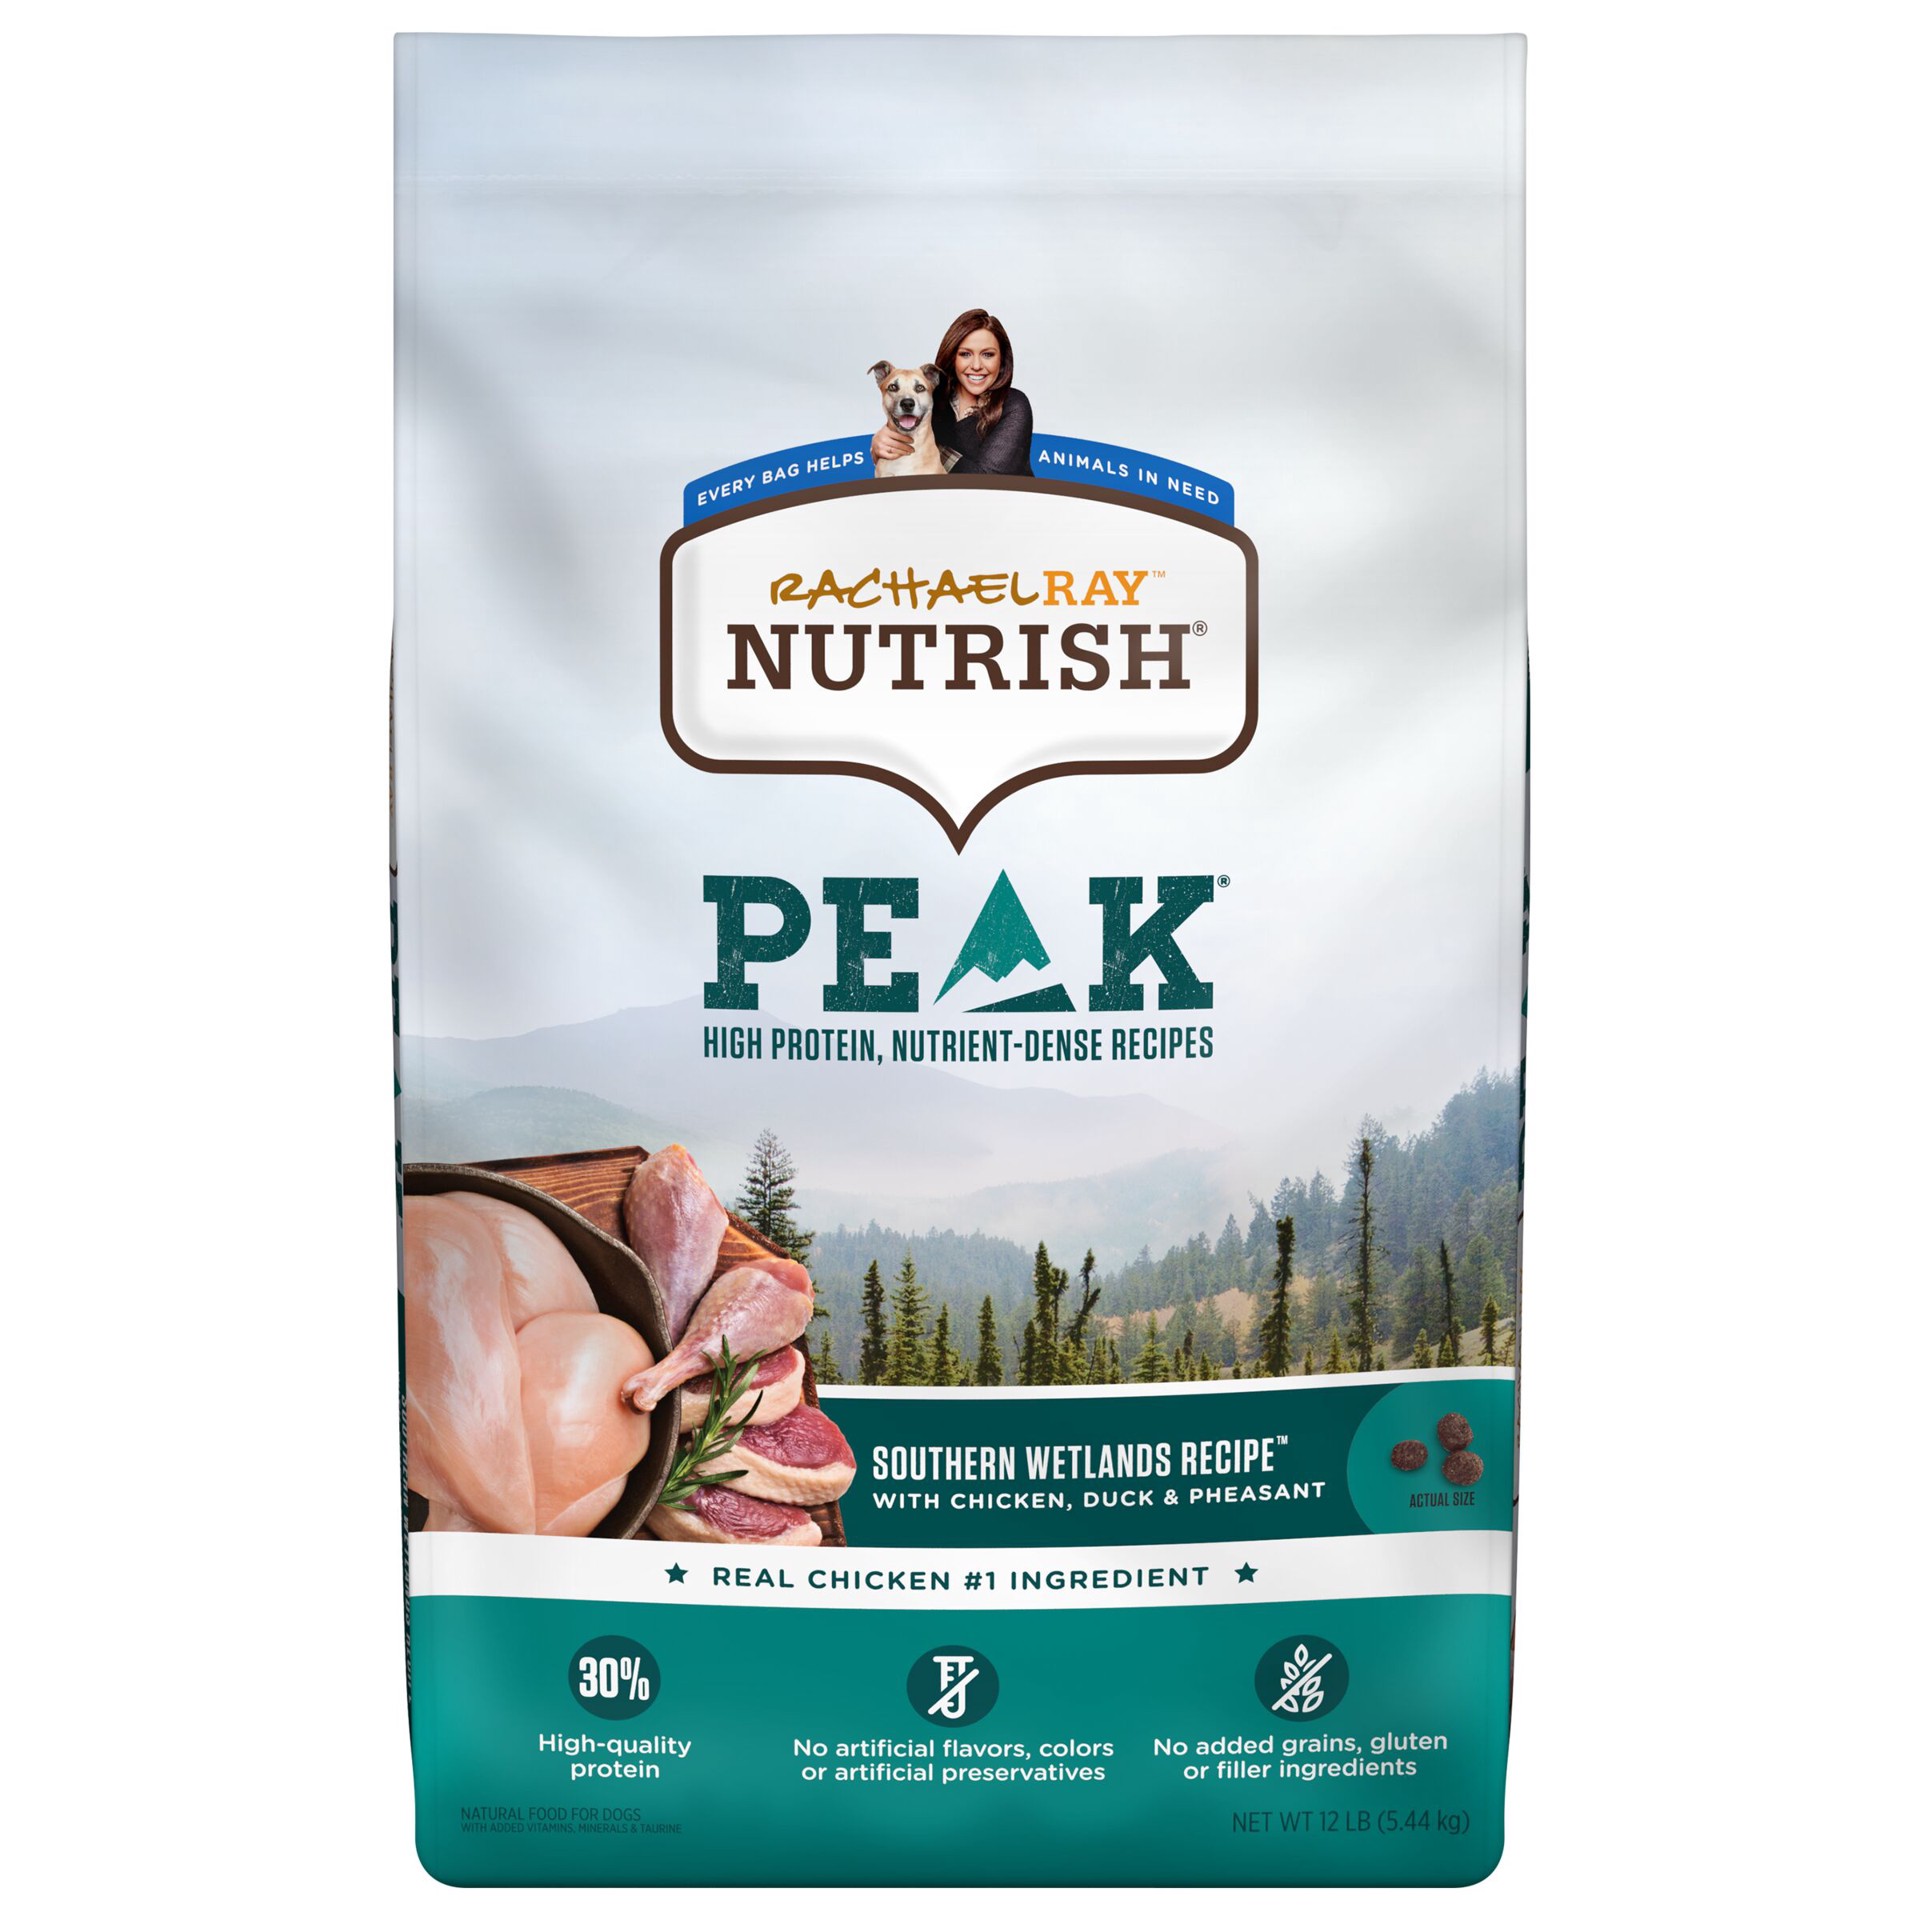 slide 1 of 8, Rachael Ray Nutrish Peak Southern Wetlands Recipe With Chicken, Duck & Pheasant, Dry Dog Food, 12 lb Bag (Packaging May Vary), 12 lb